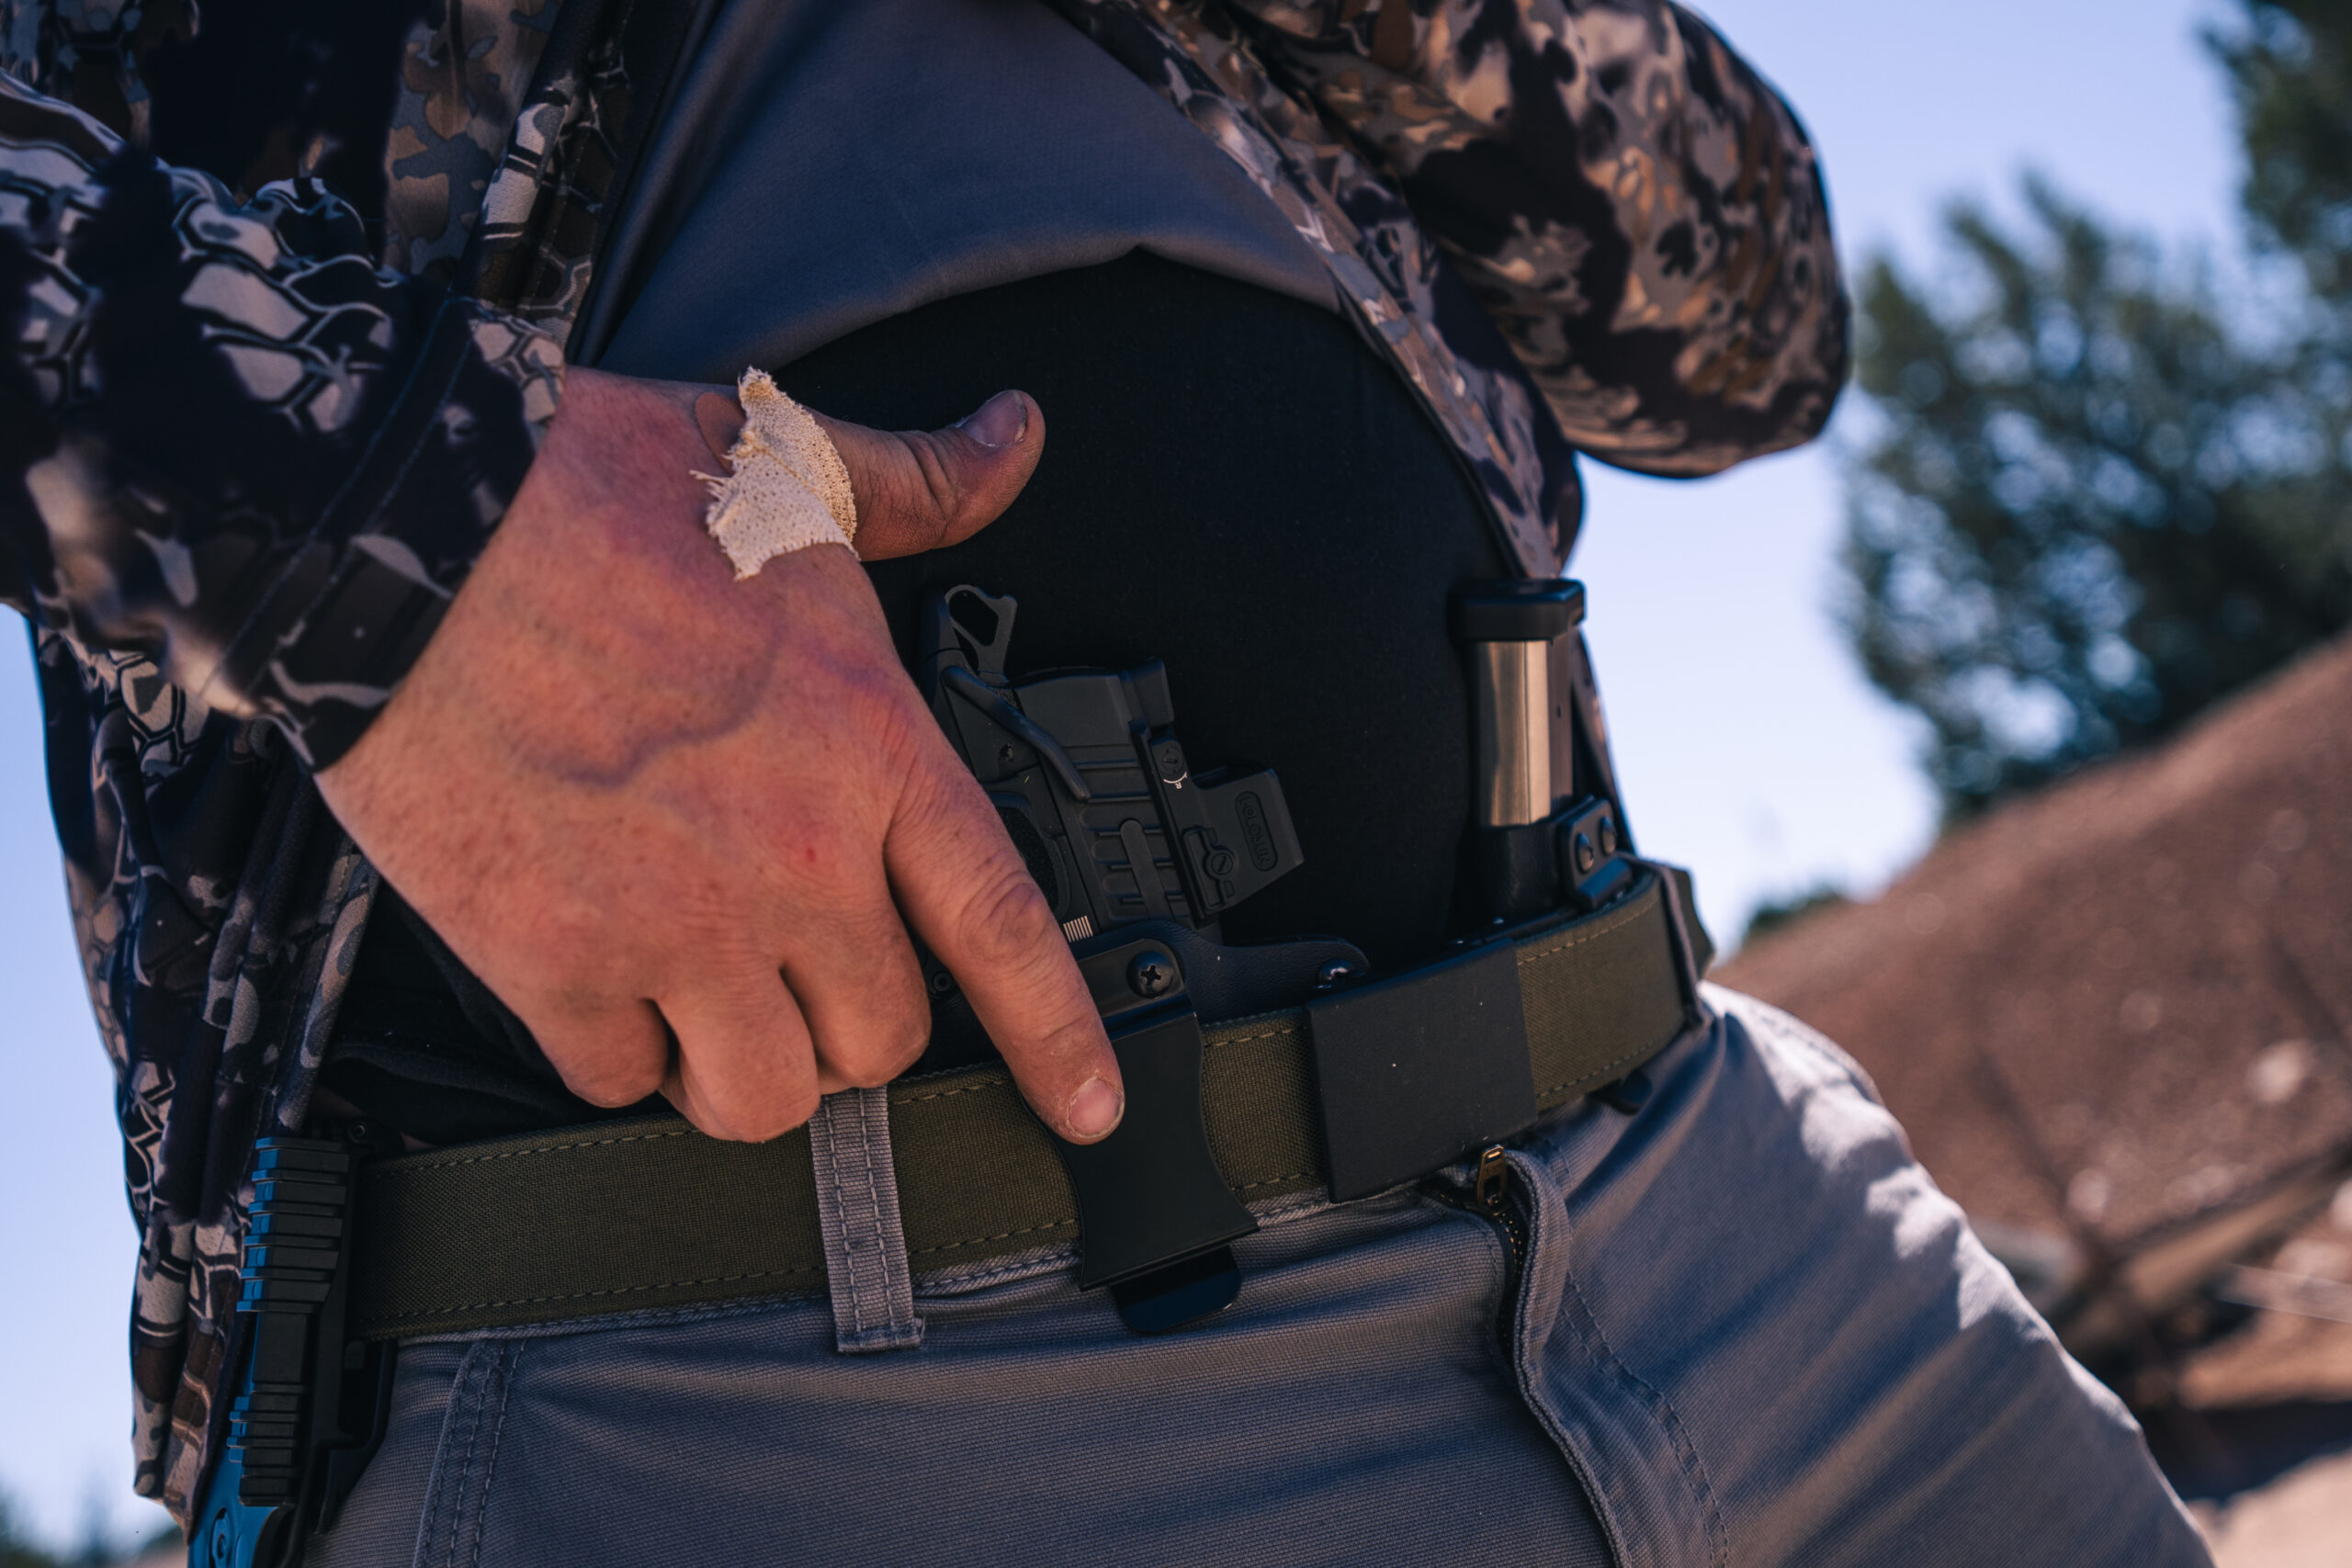 Discover The 3 Best Types Of Waistband Holster For Concealed Carry